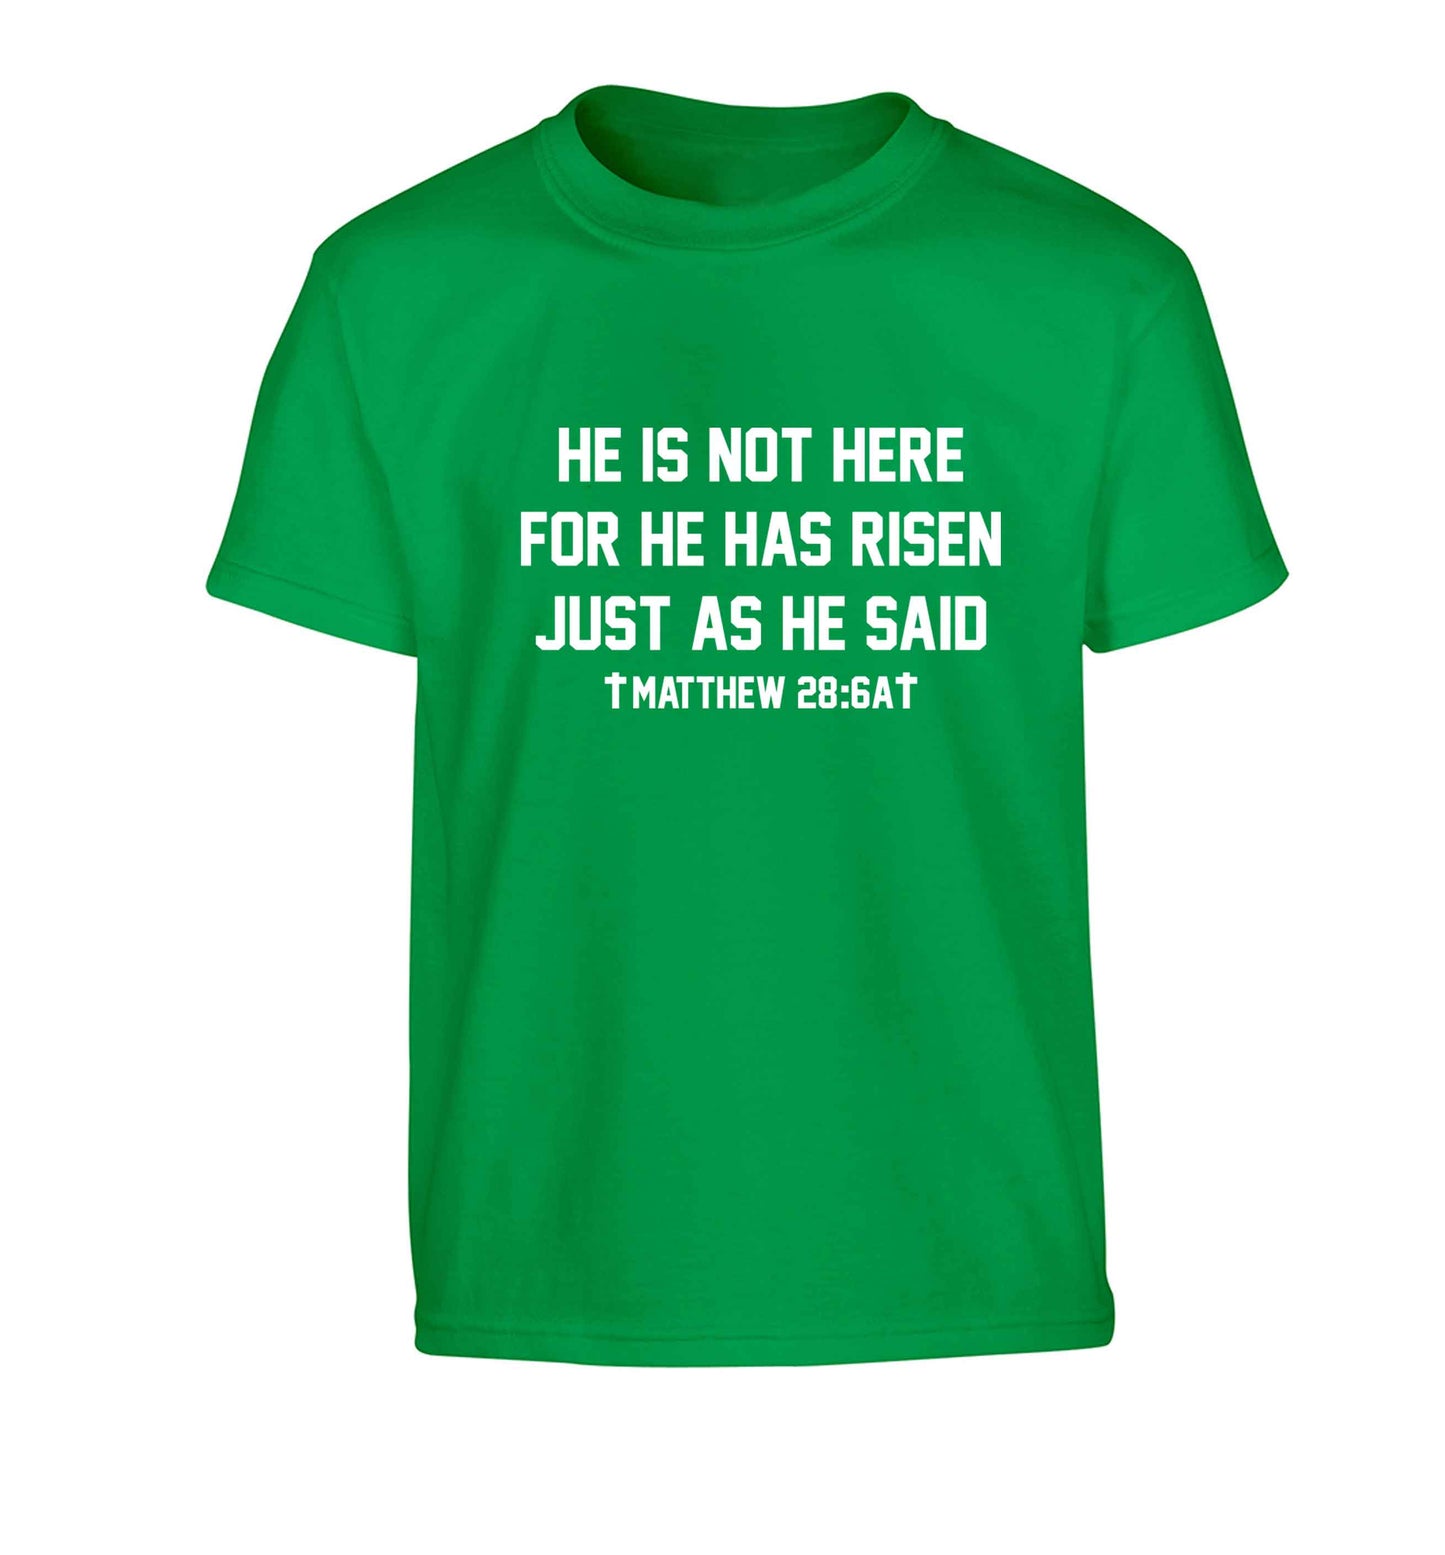 He is not here for he has risen just as he said matthew 28:6A Children's green Tshirt 12-13 Years